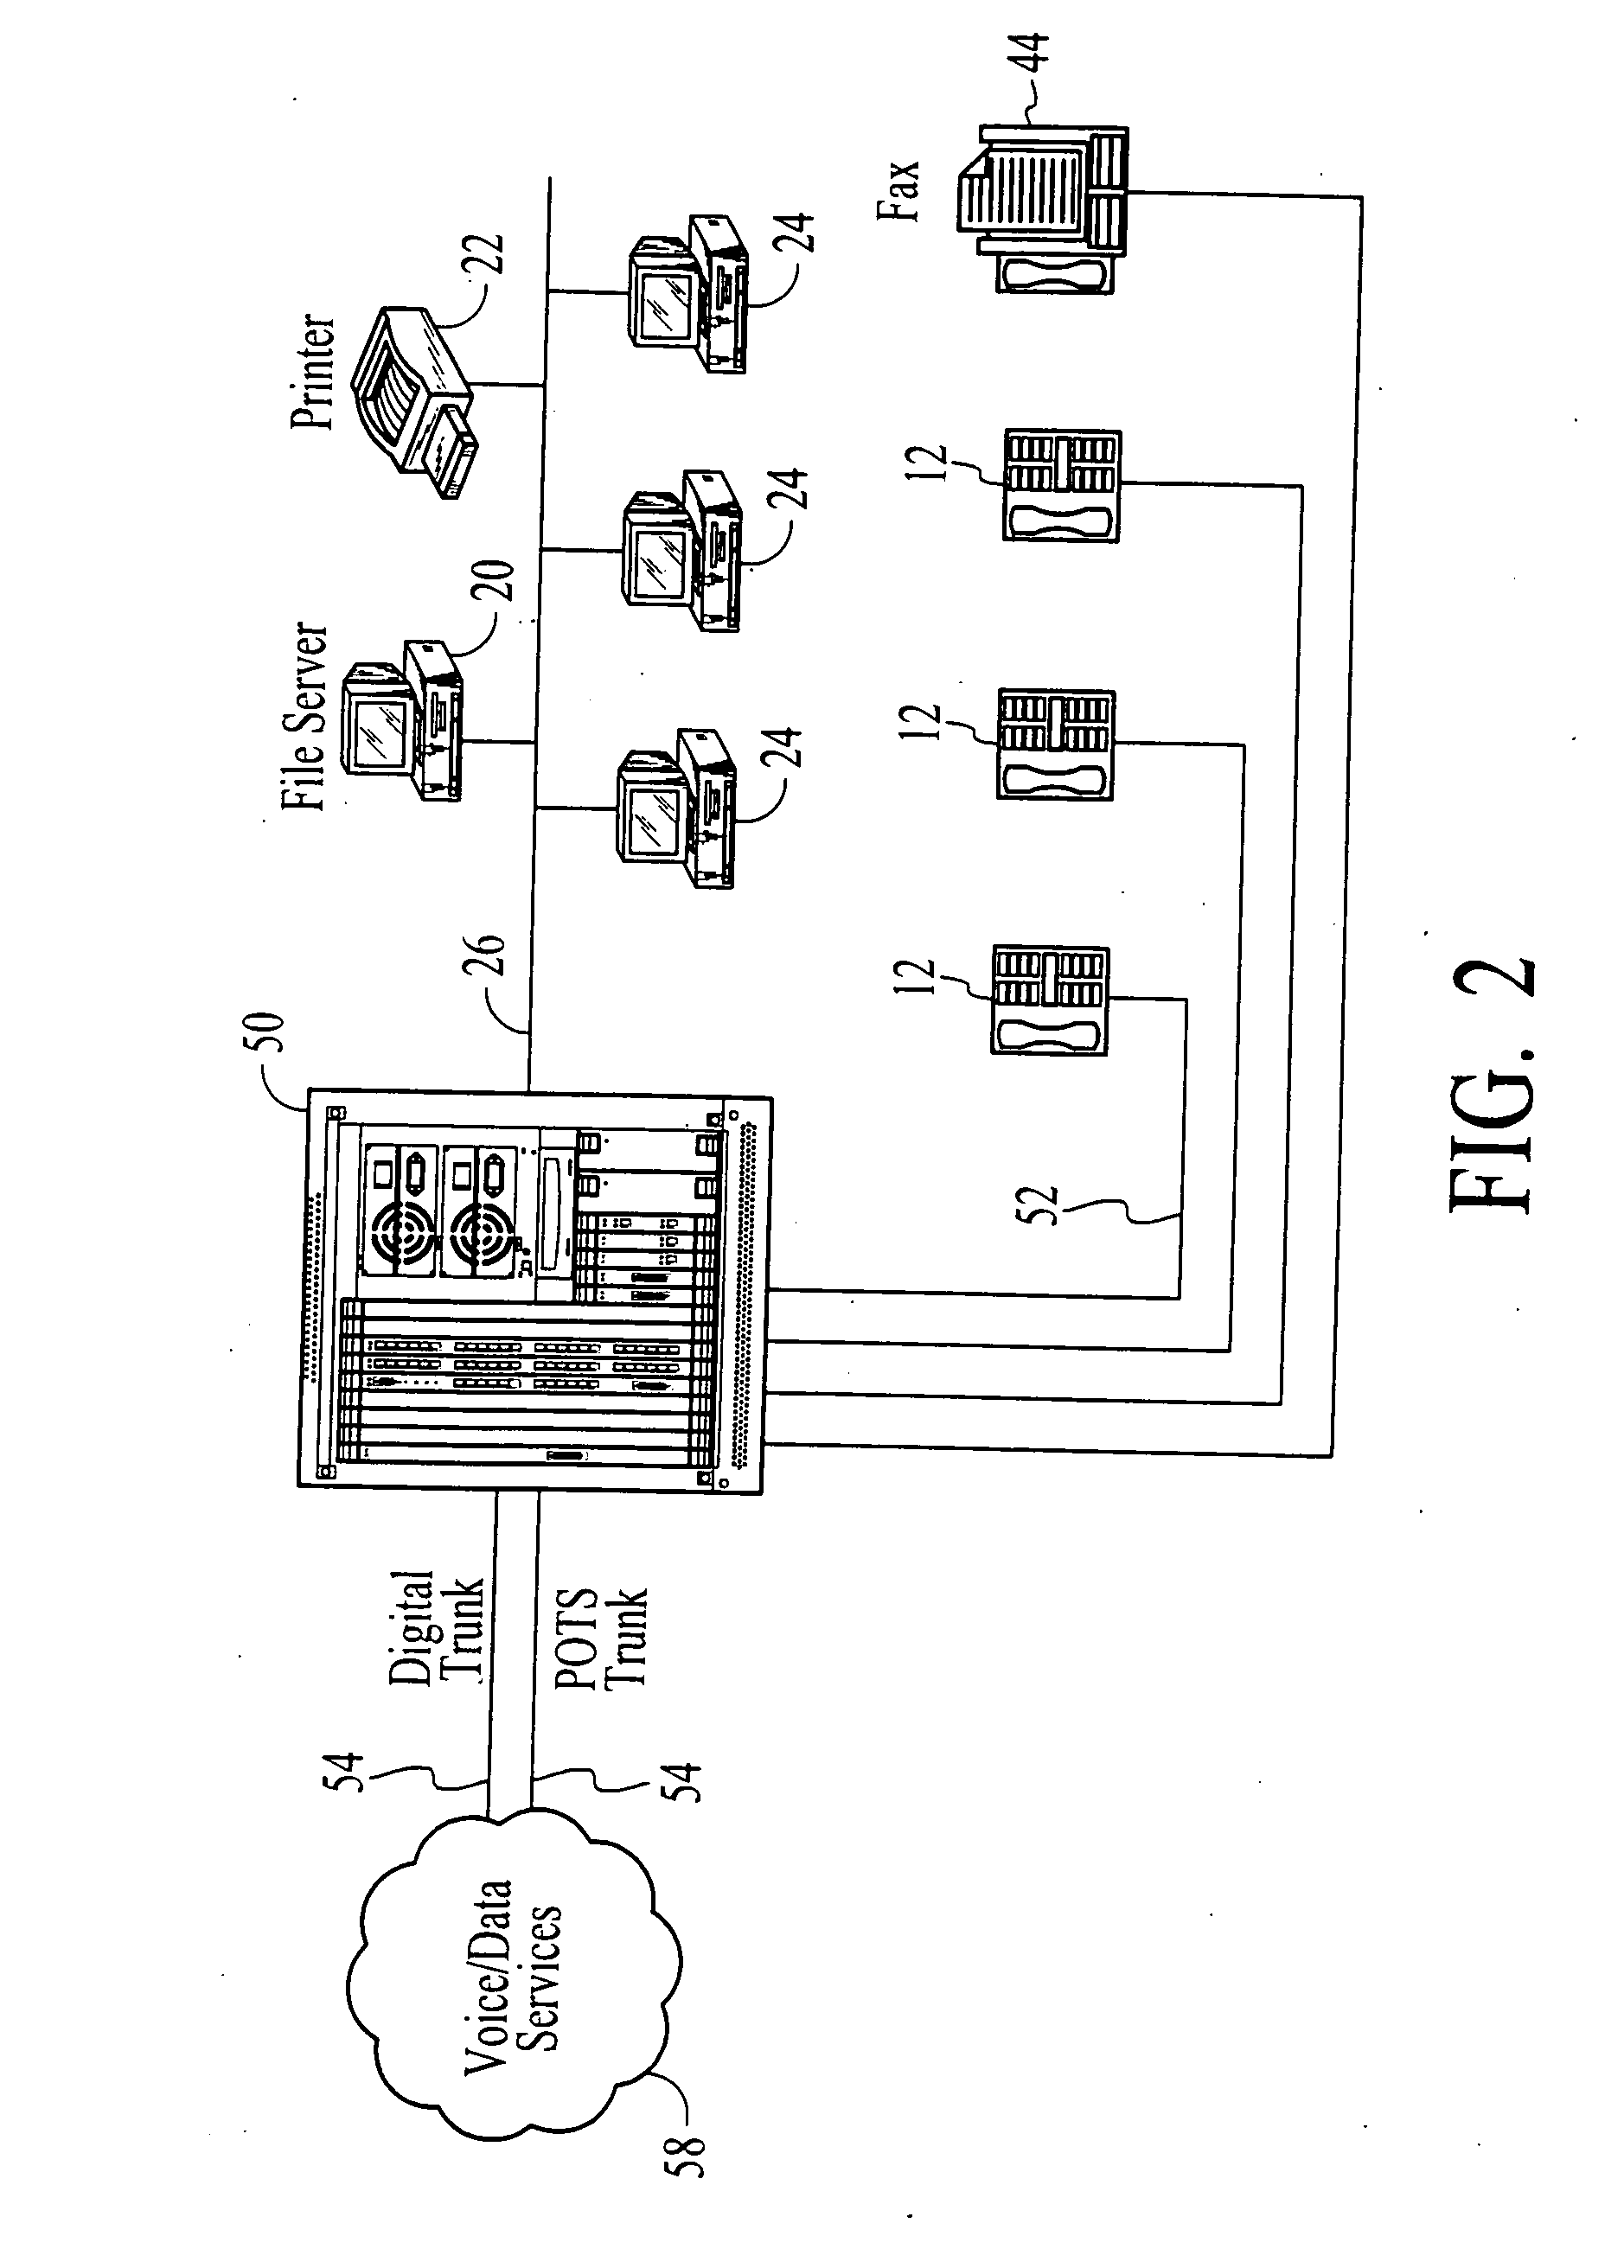 Systems and methods for providing configurable caller id iformation